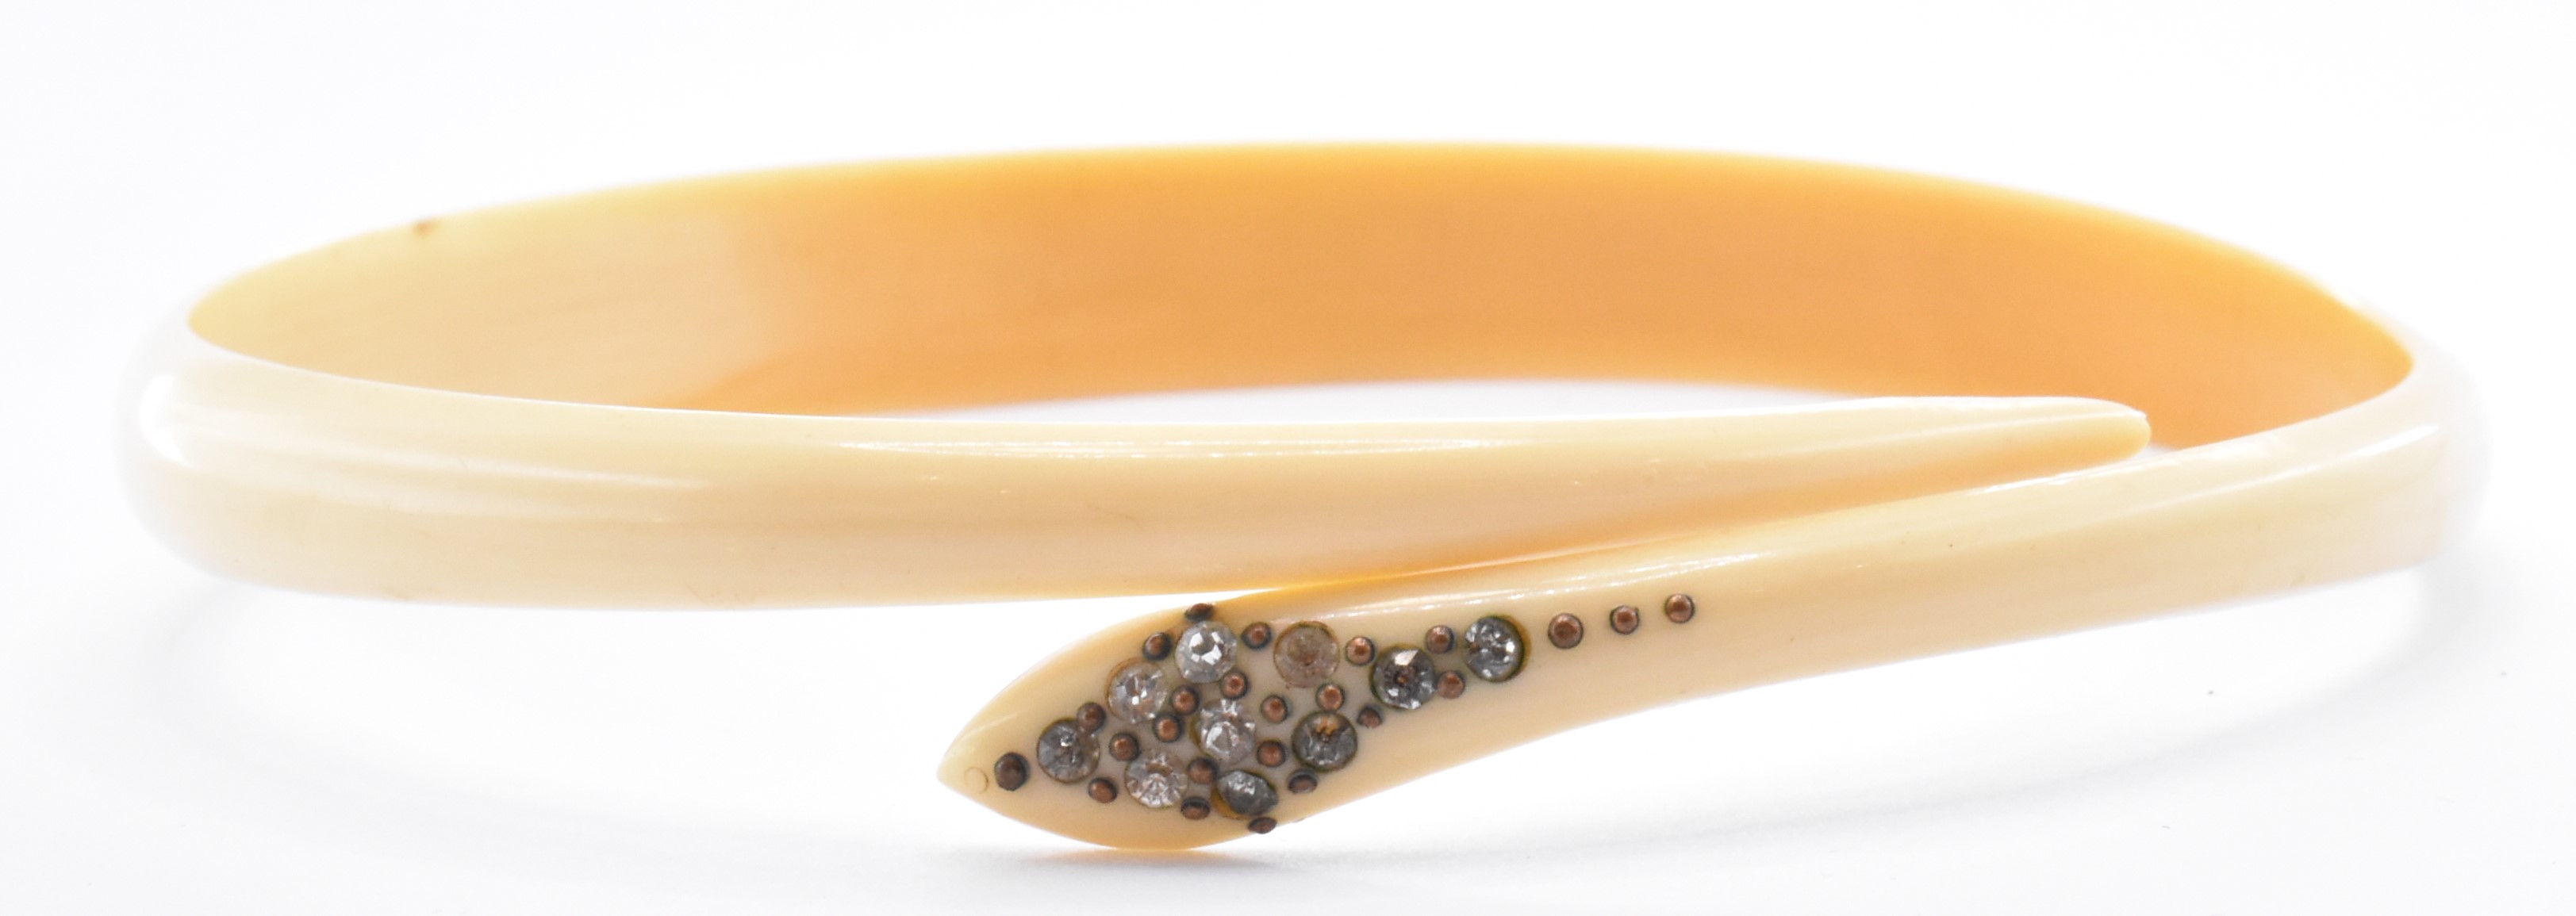 1930S ART DECO CELLULOID SNAKE CUFF BANGLE - Image 5 of 5